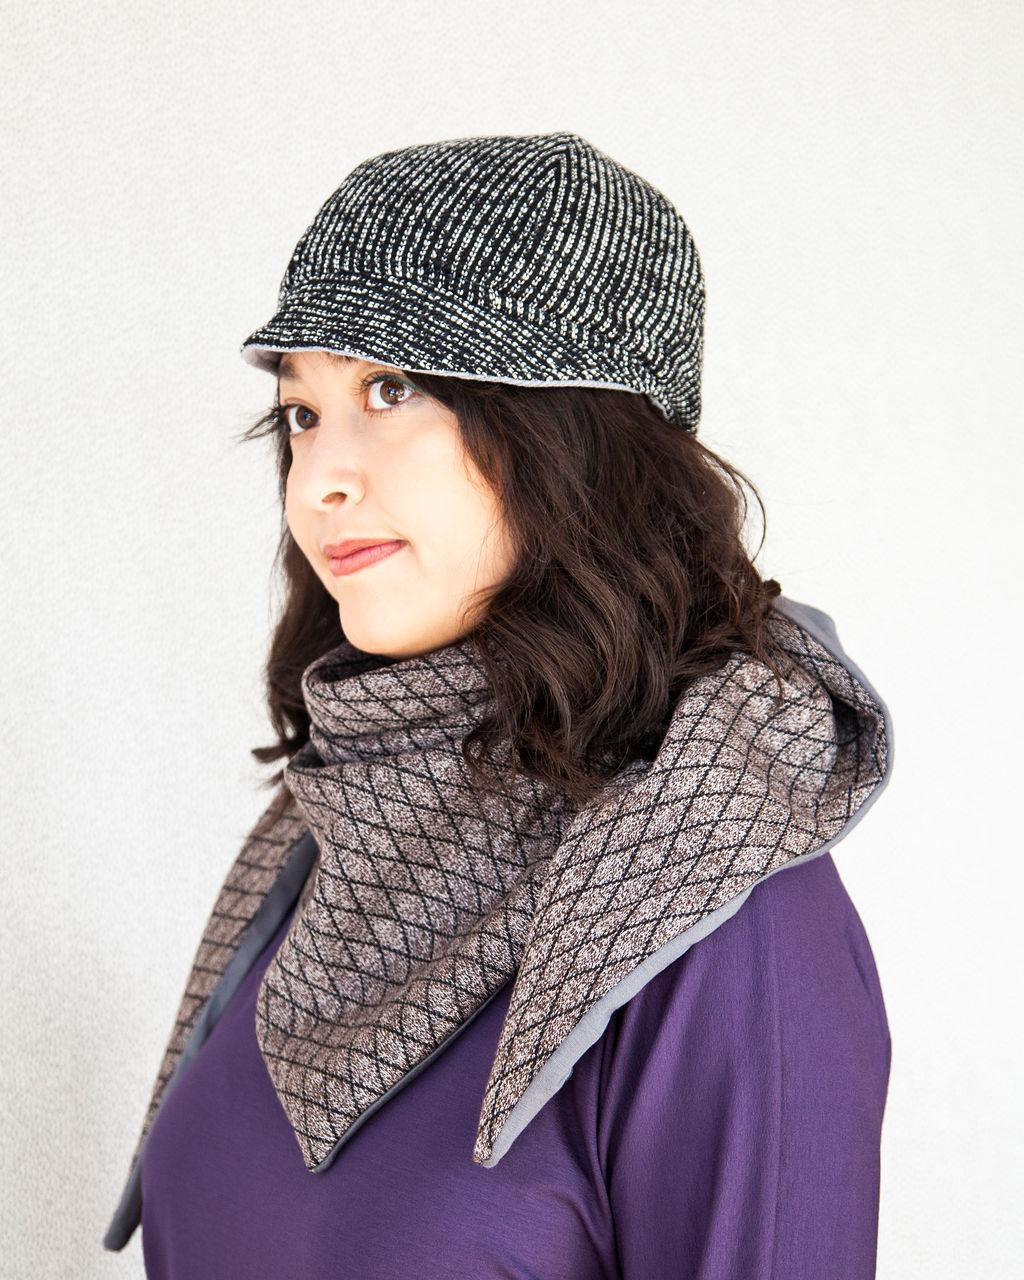 Squasht Bella Hat in Lightweight Black and White Boucle with Grey Reverse (Reversible)